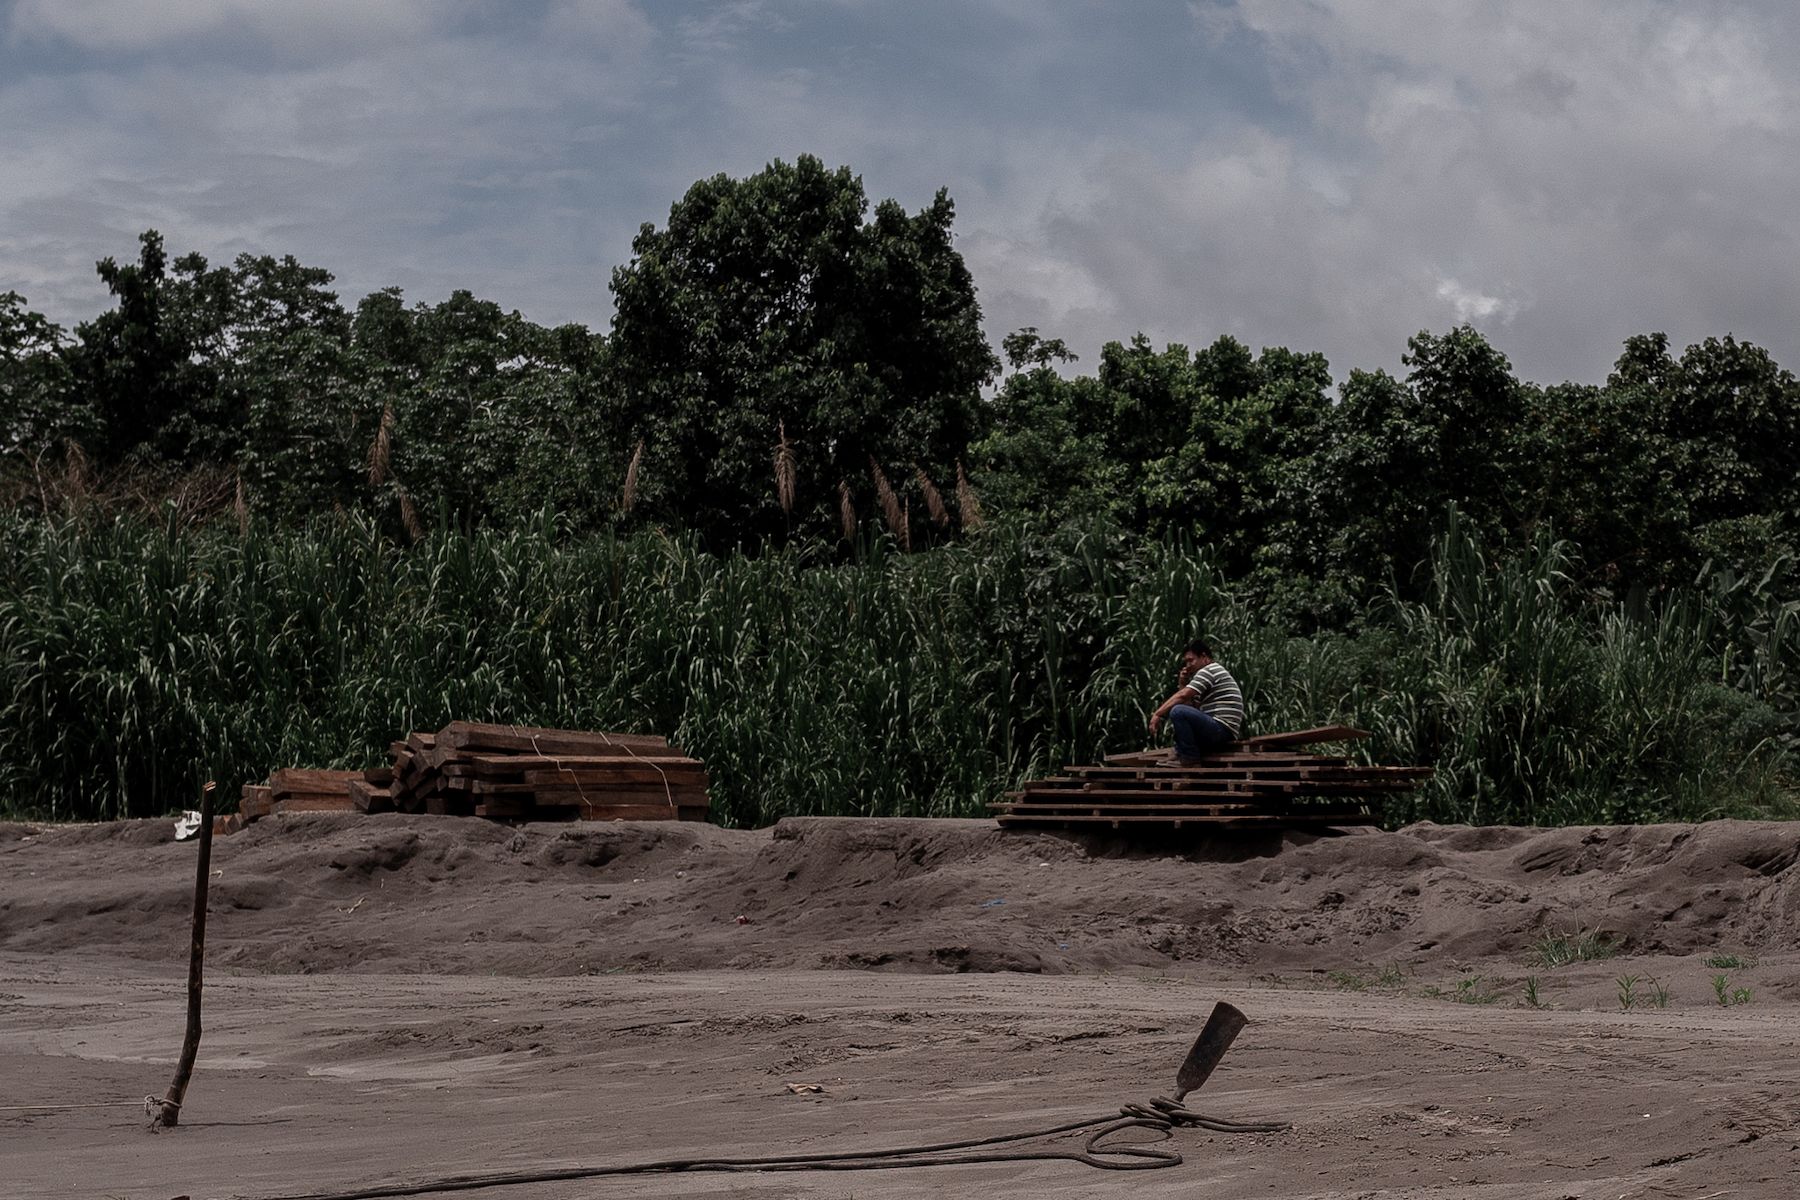 Illegally harvested timber awaiting pick-up by a boat that will transport it to market. Image by Marcio Pimenta. Peru, 2019.